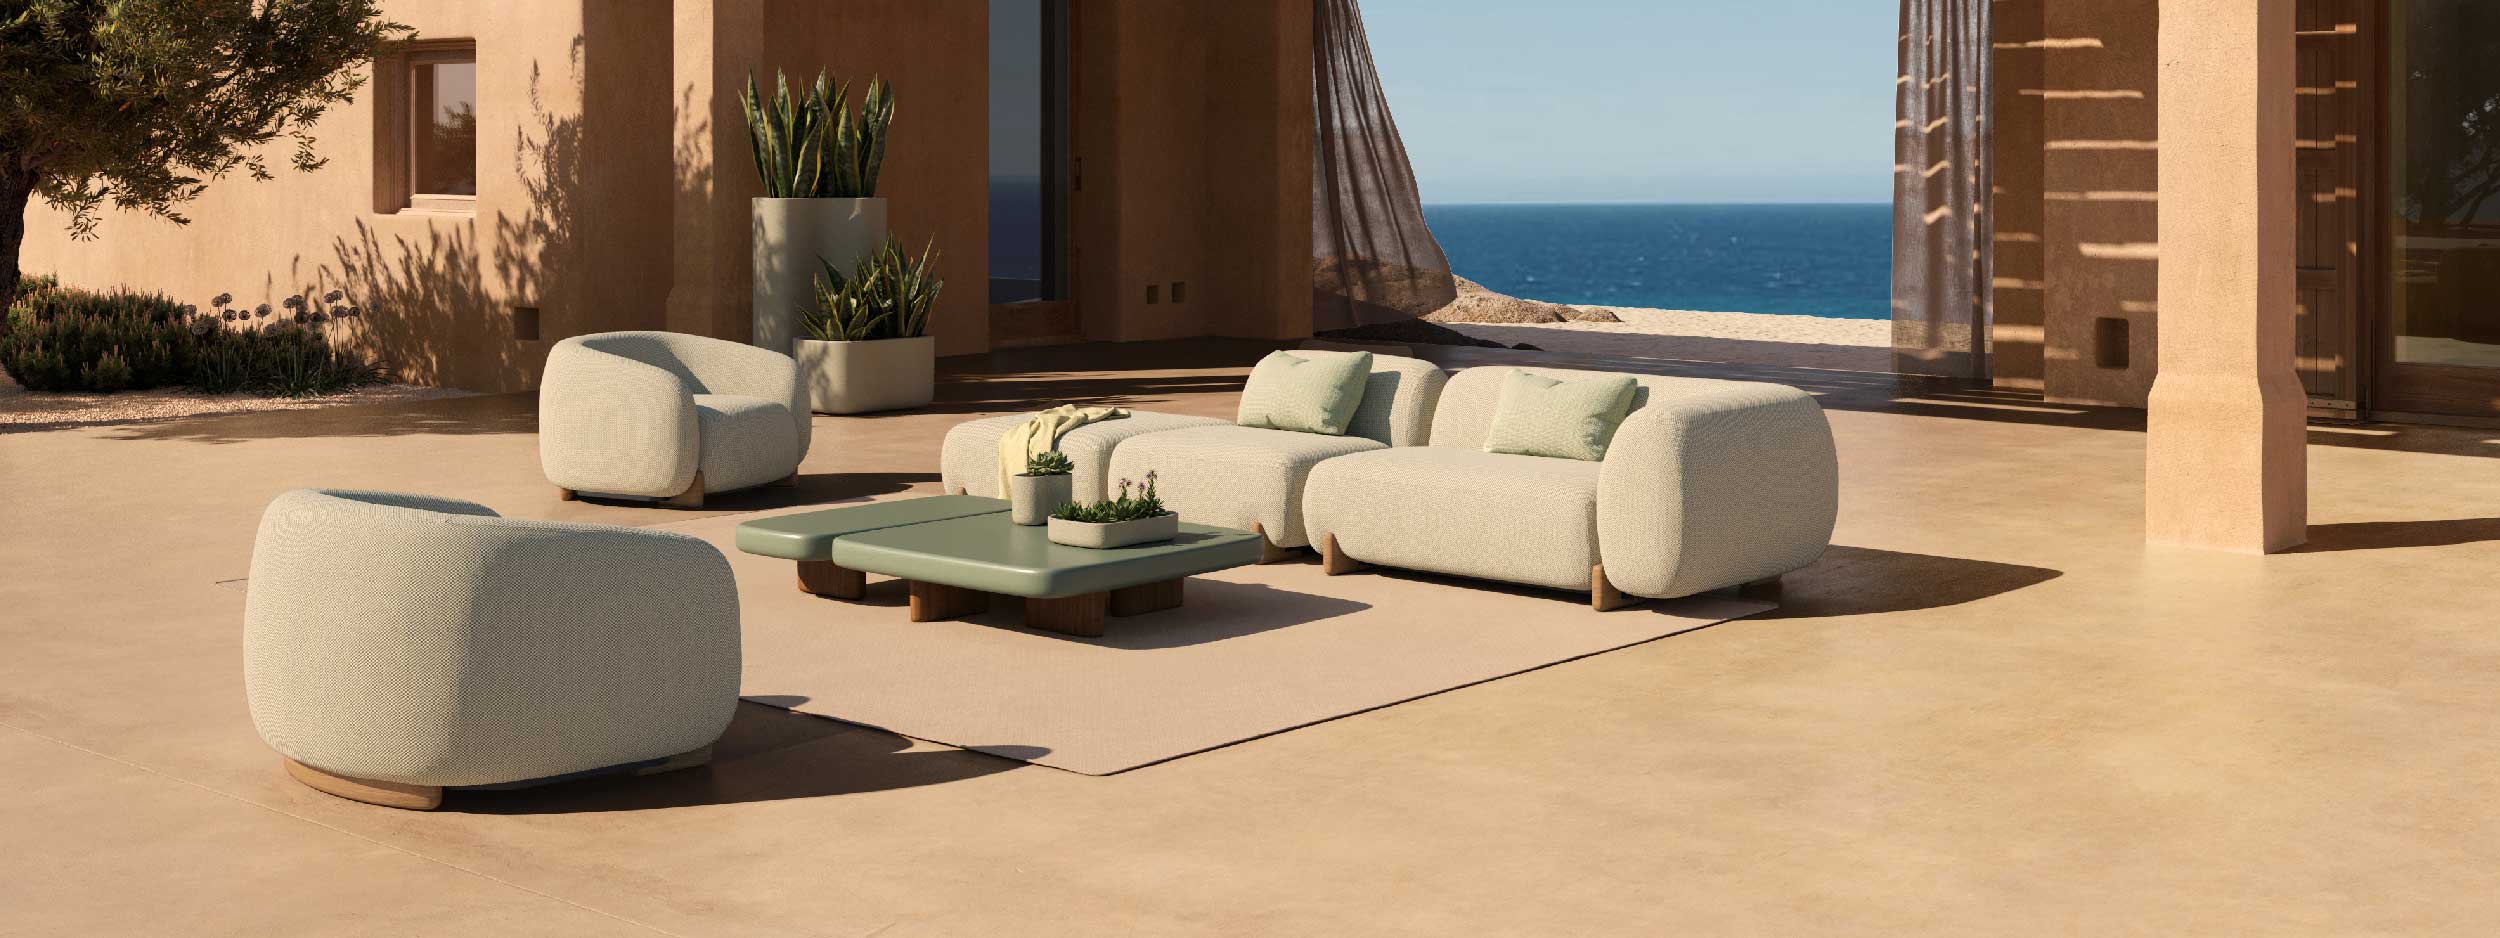 Image of Milos sectional garden sofa and upholstered outdoor lounge chairs in sunny courtyard, with drapes billowing in the background and inviting blue sea beyond